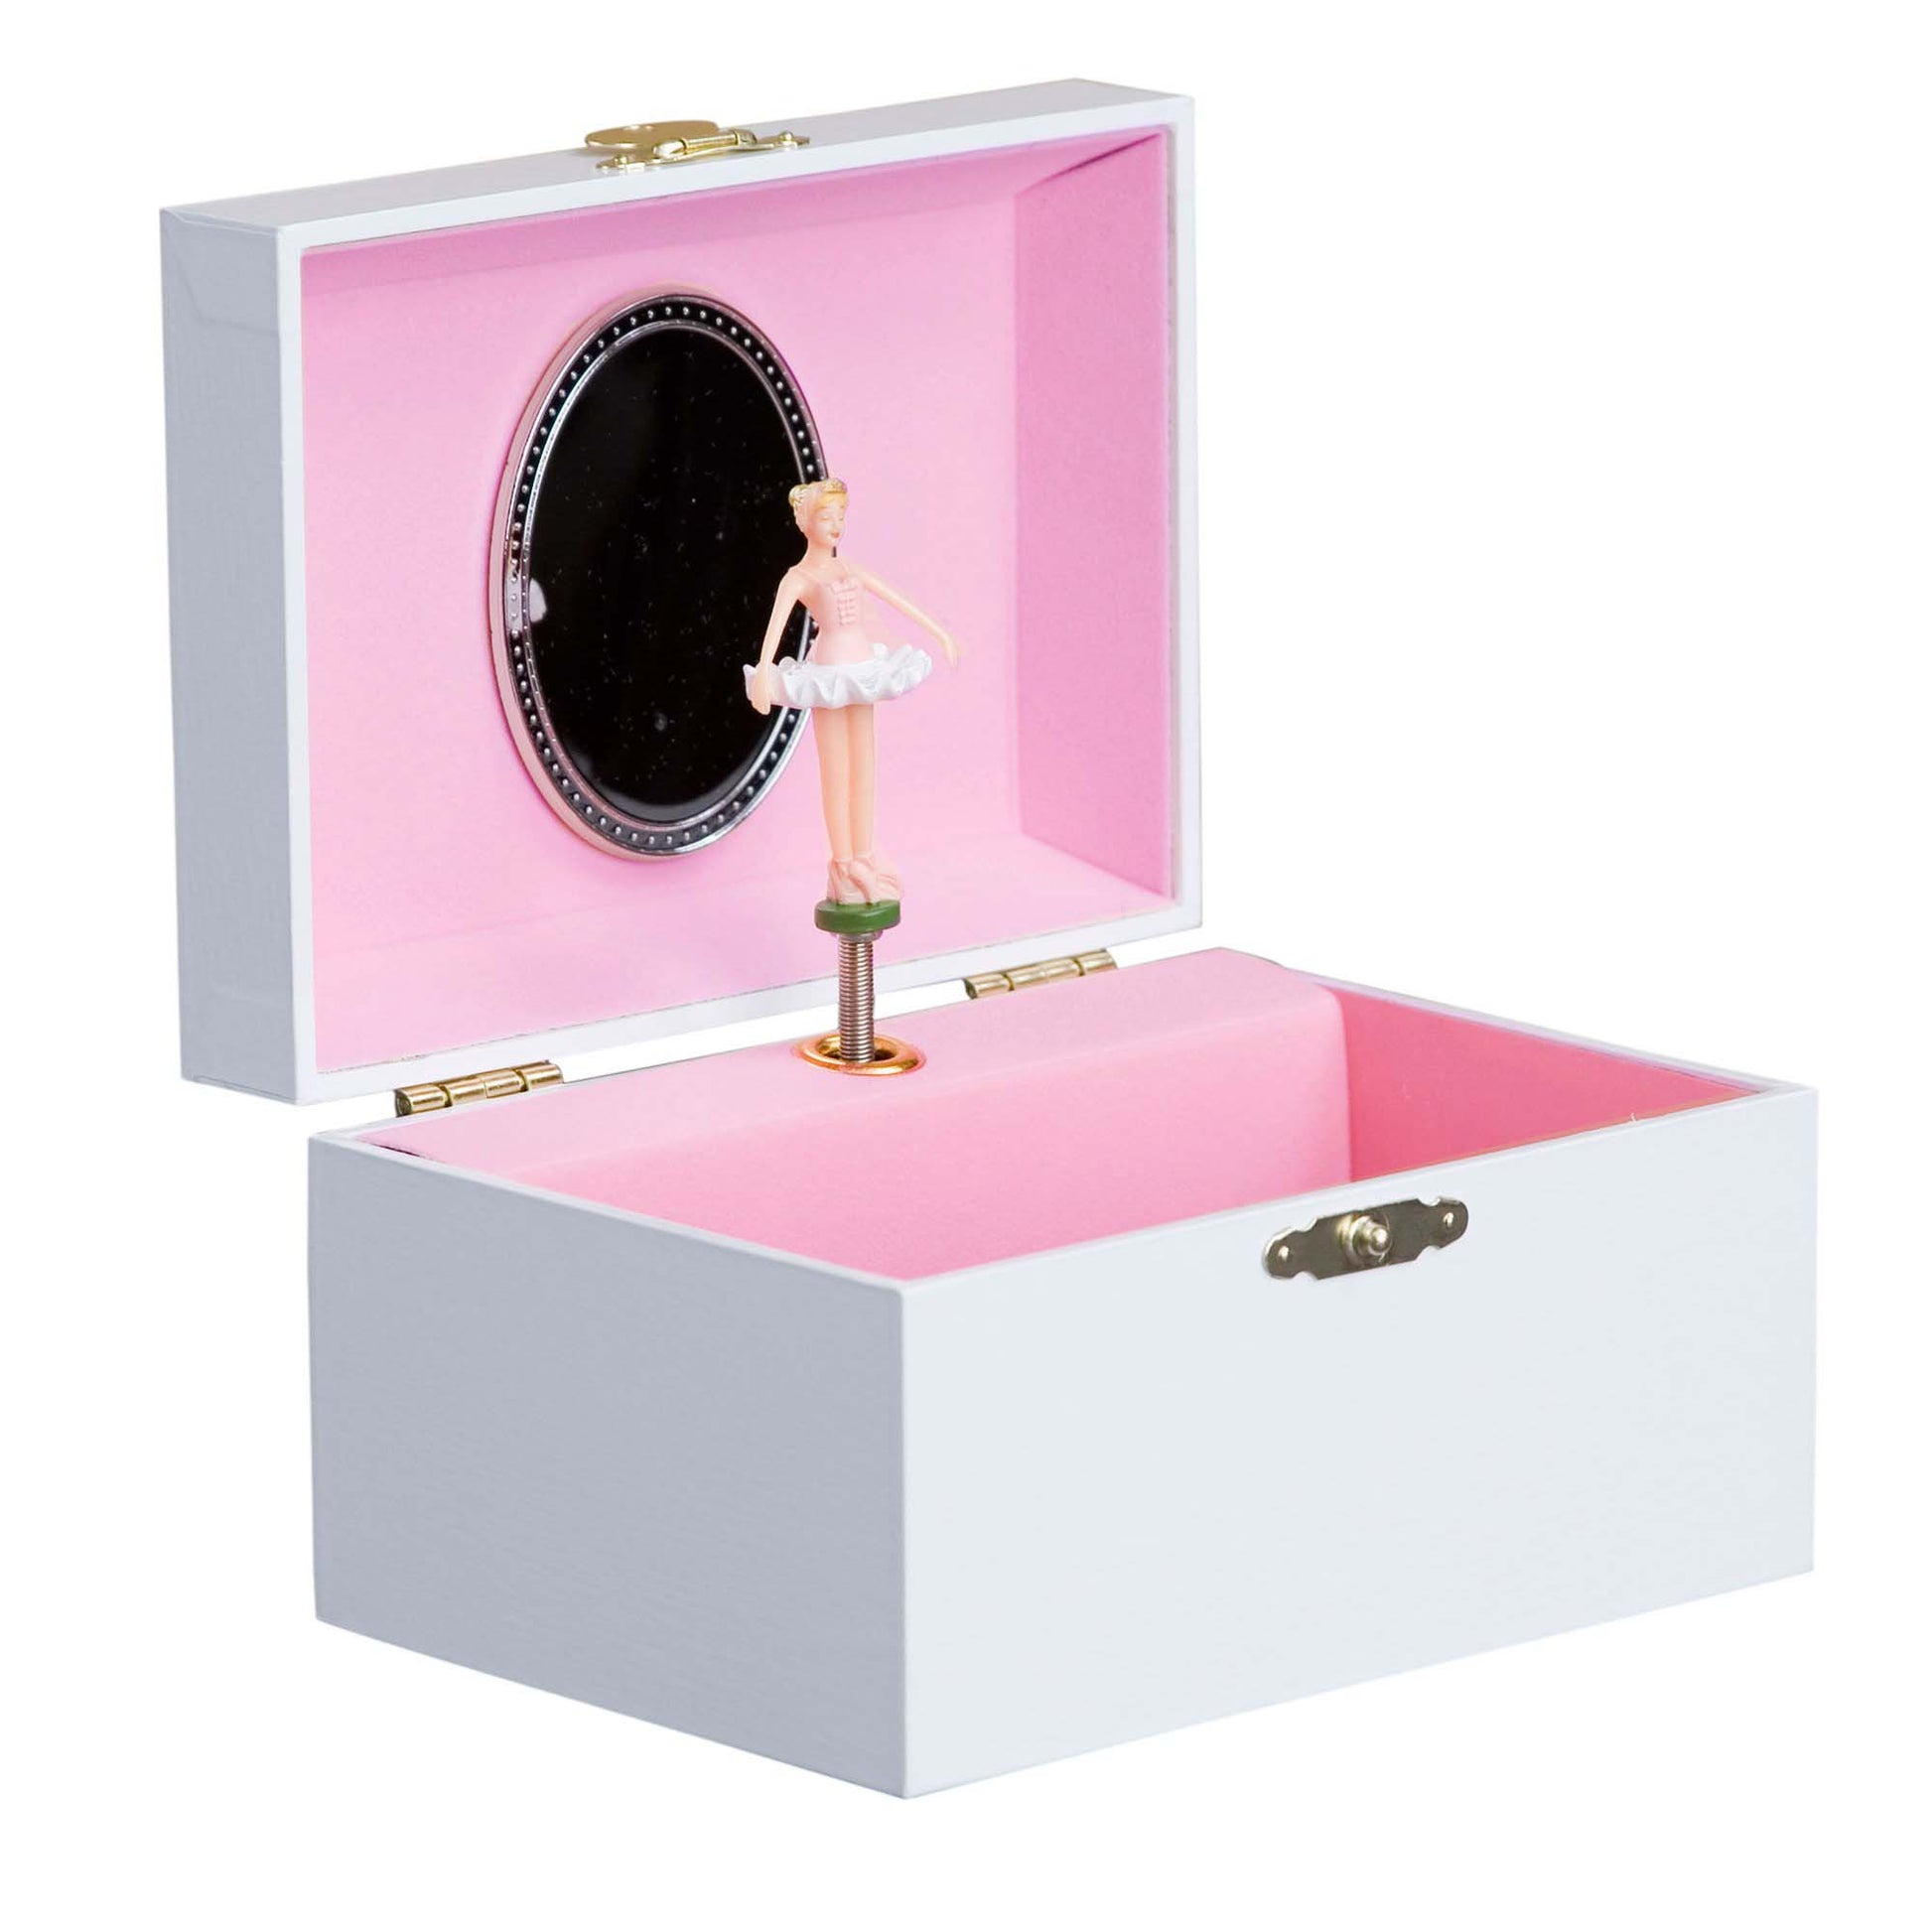 Personalized Ballerina Jewelry Box with Pink Bow design